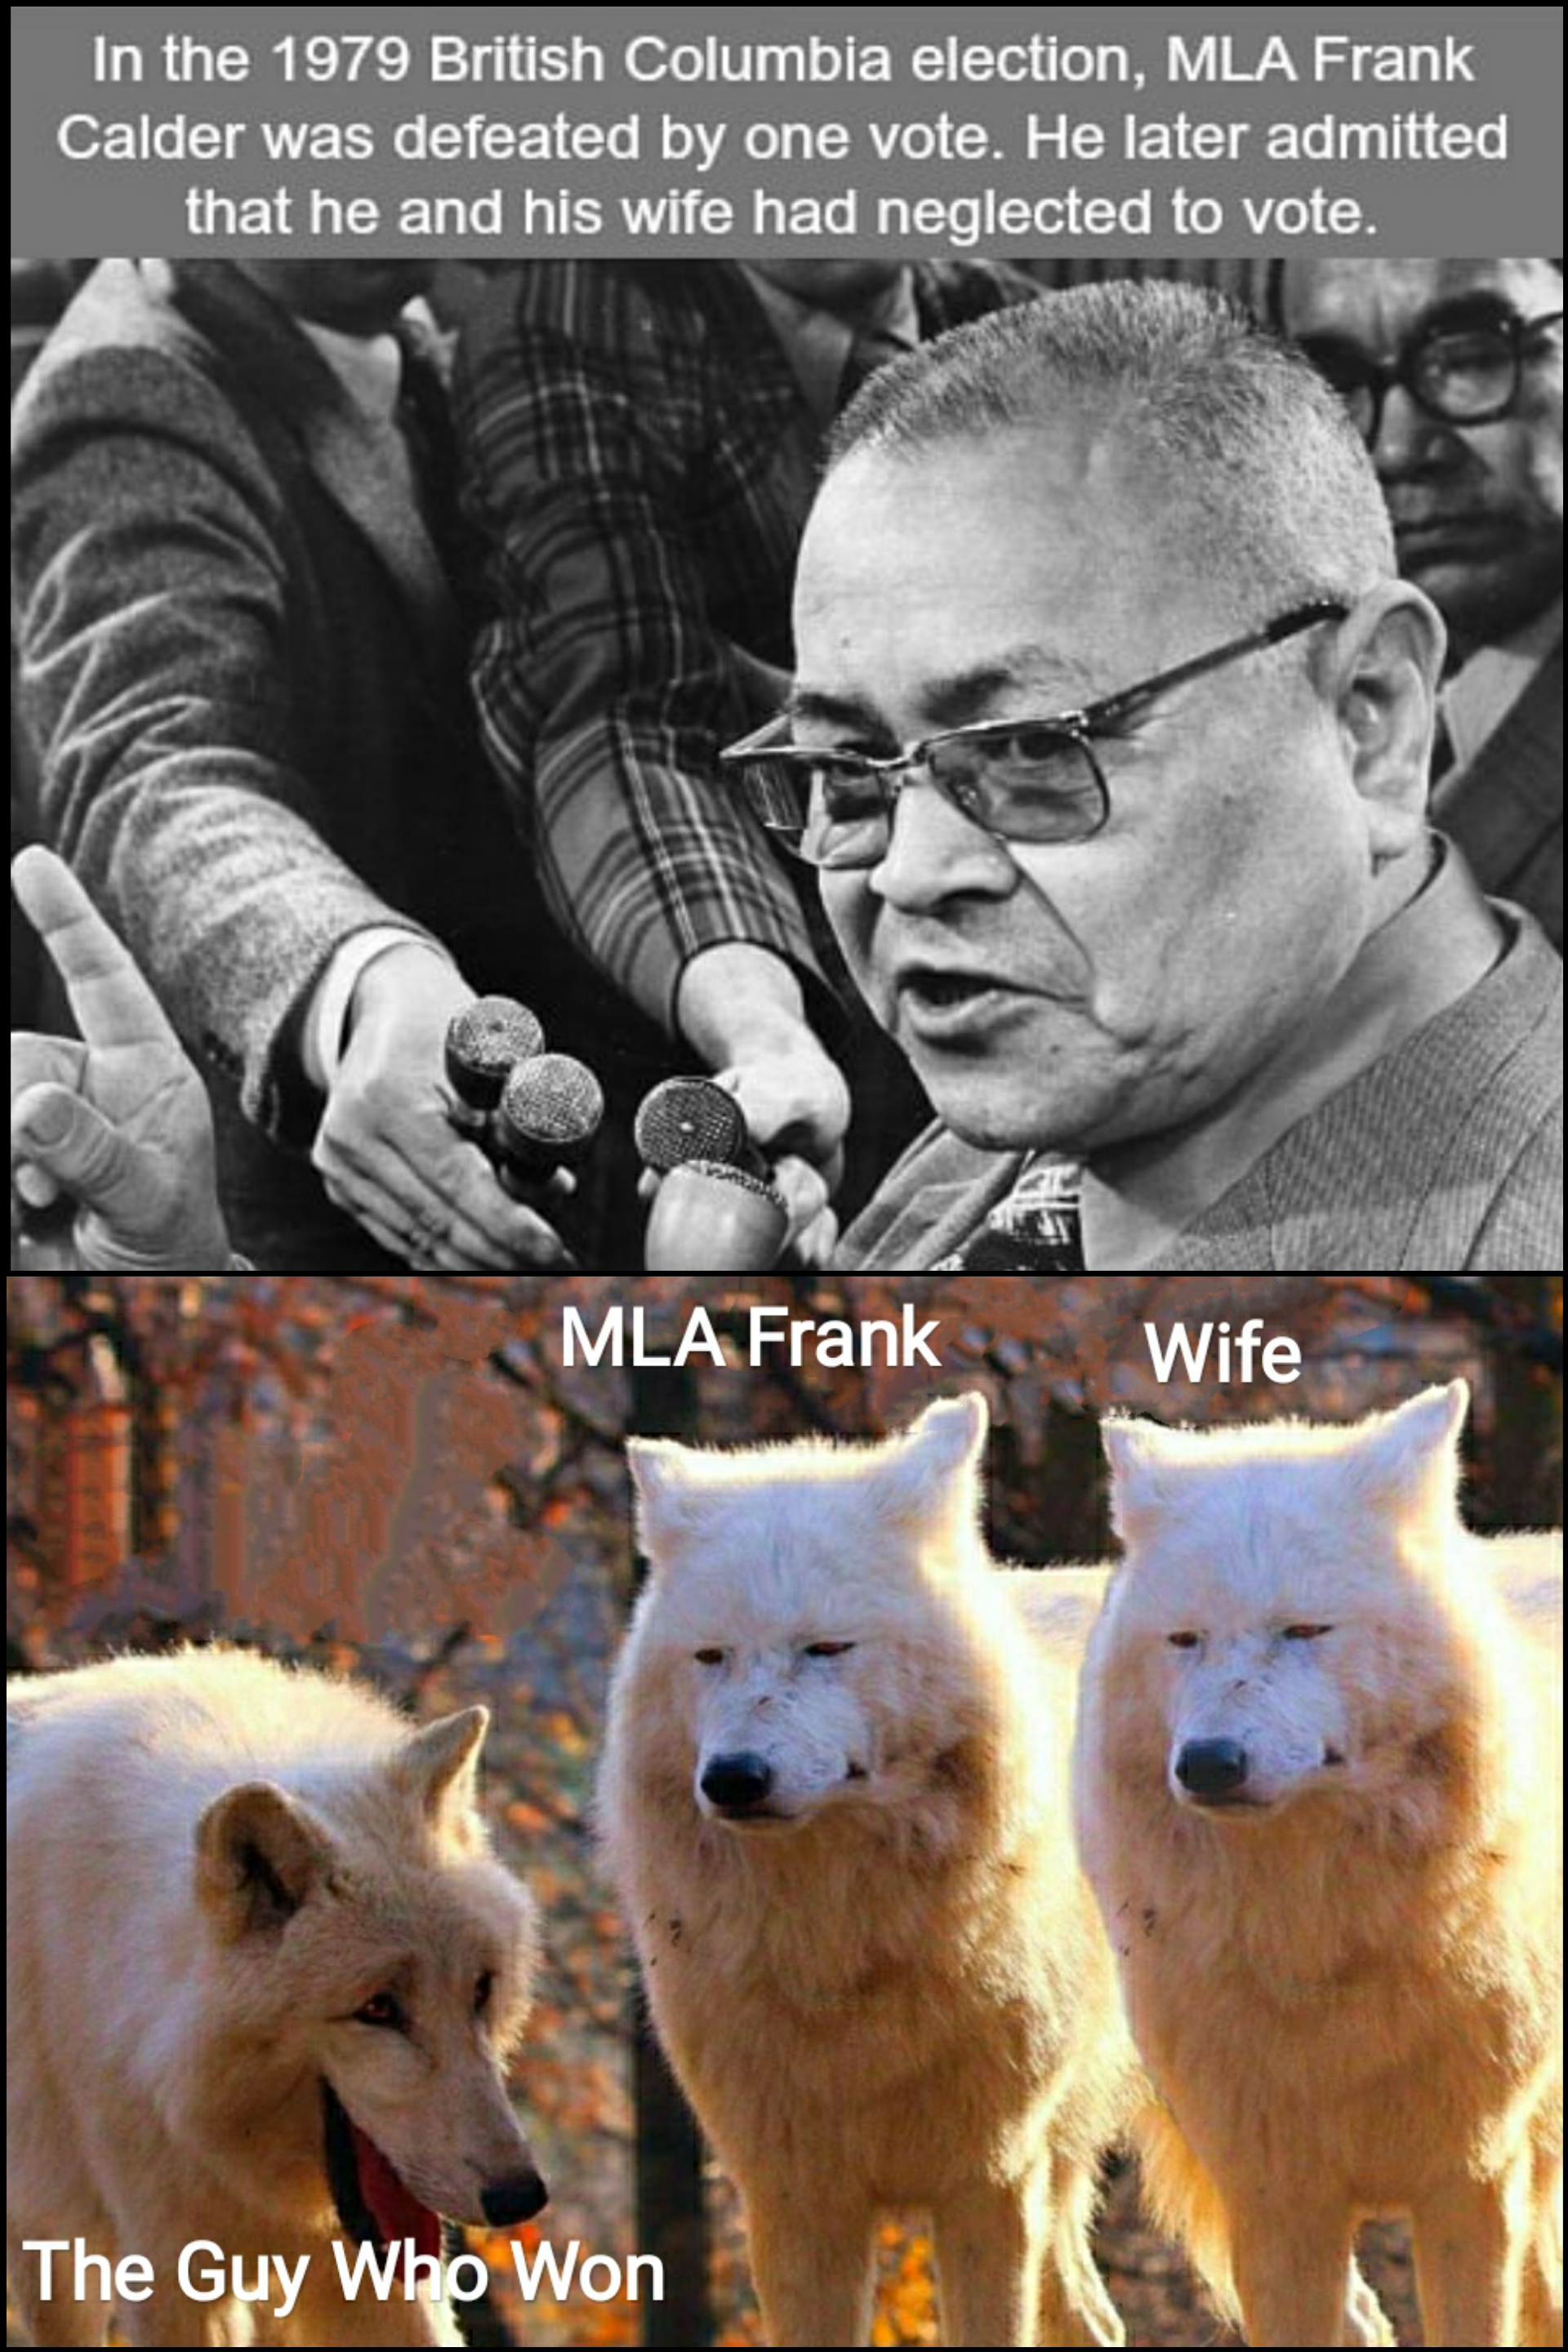 reddit dank memes 2020 - laughing wolf meme - In the 1979 British Columbia election, Mla Frank Calder was defeated by one vote. He later admitted that he and his wife had neglected to vote. Mla Frank Wife The Guy Who Won